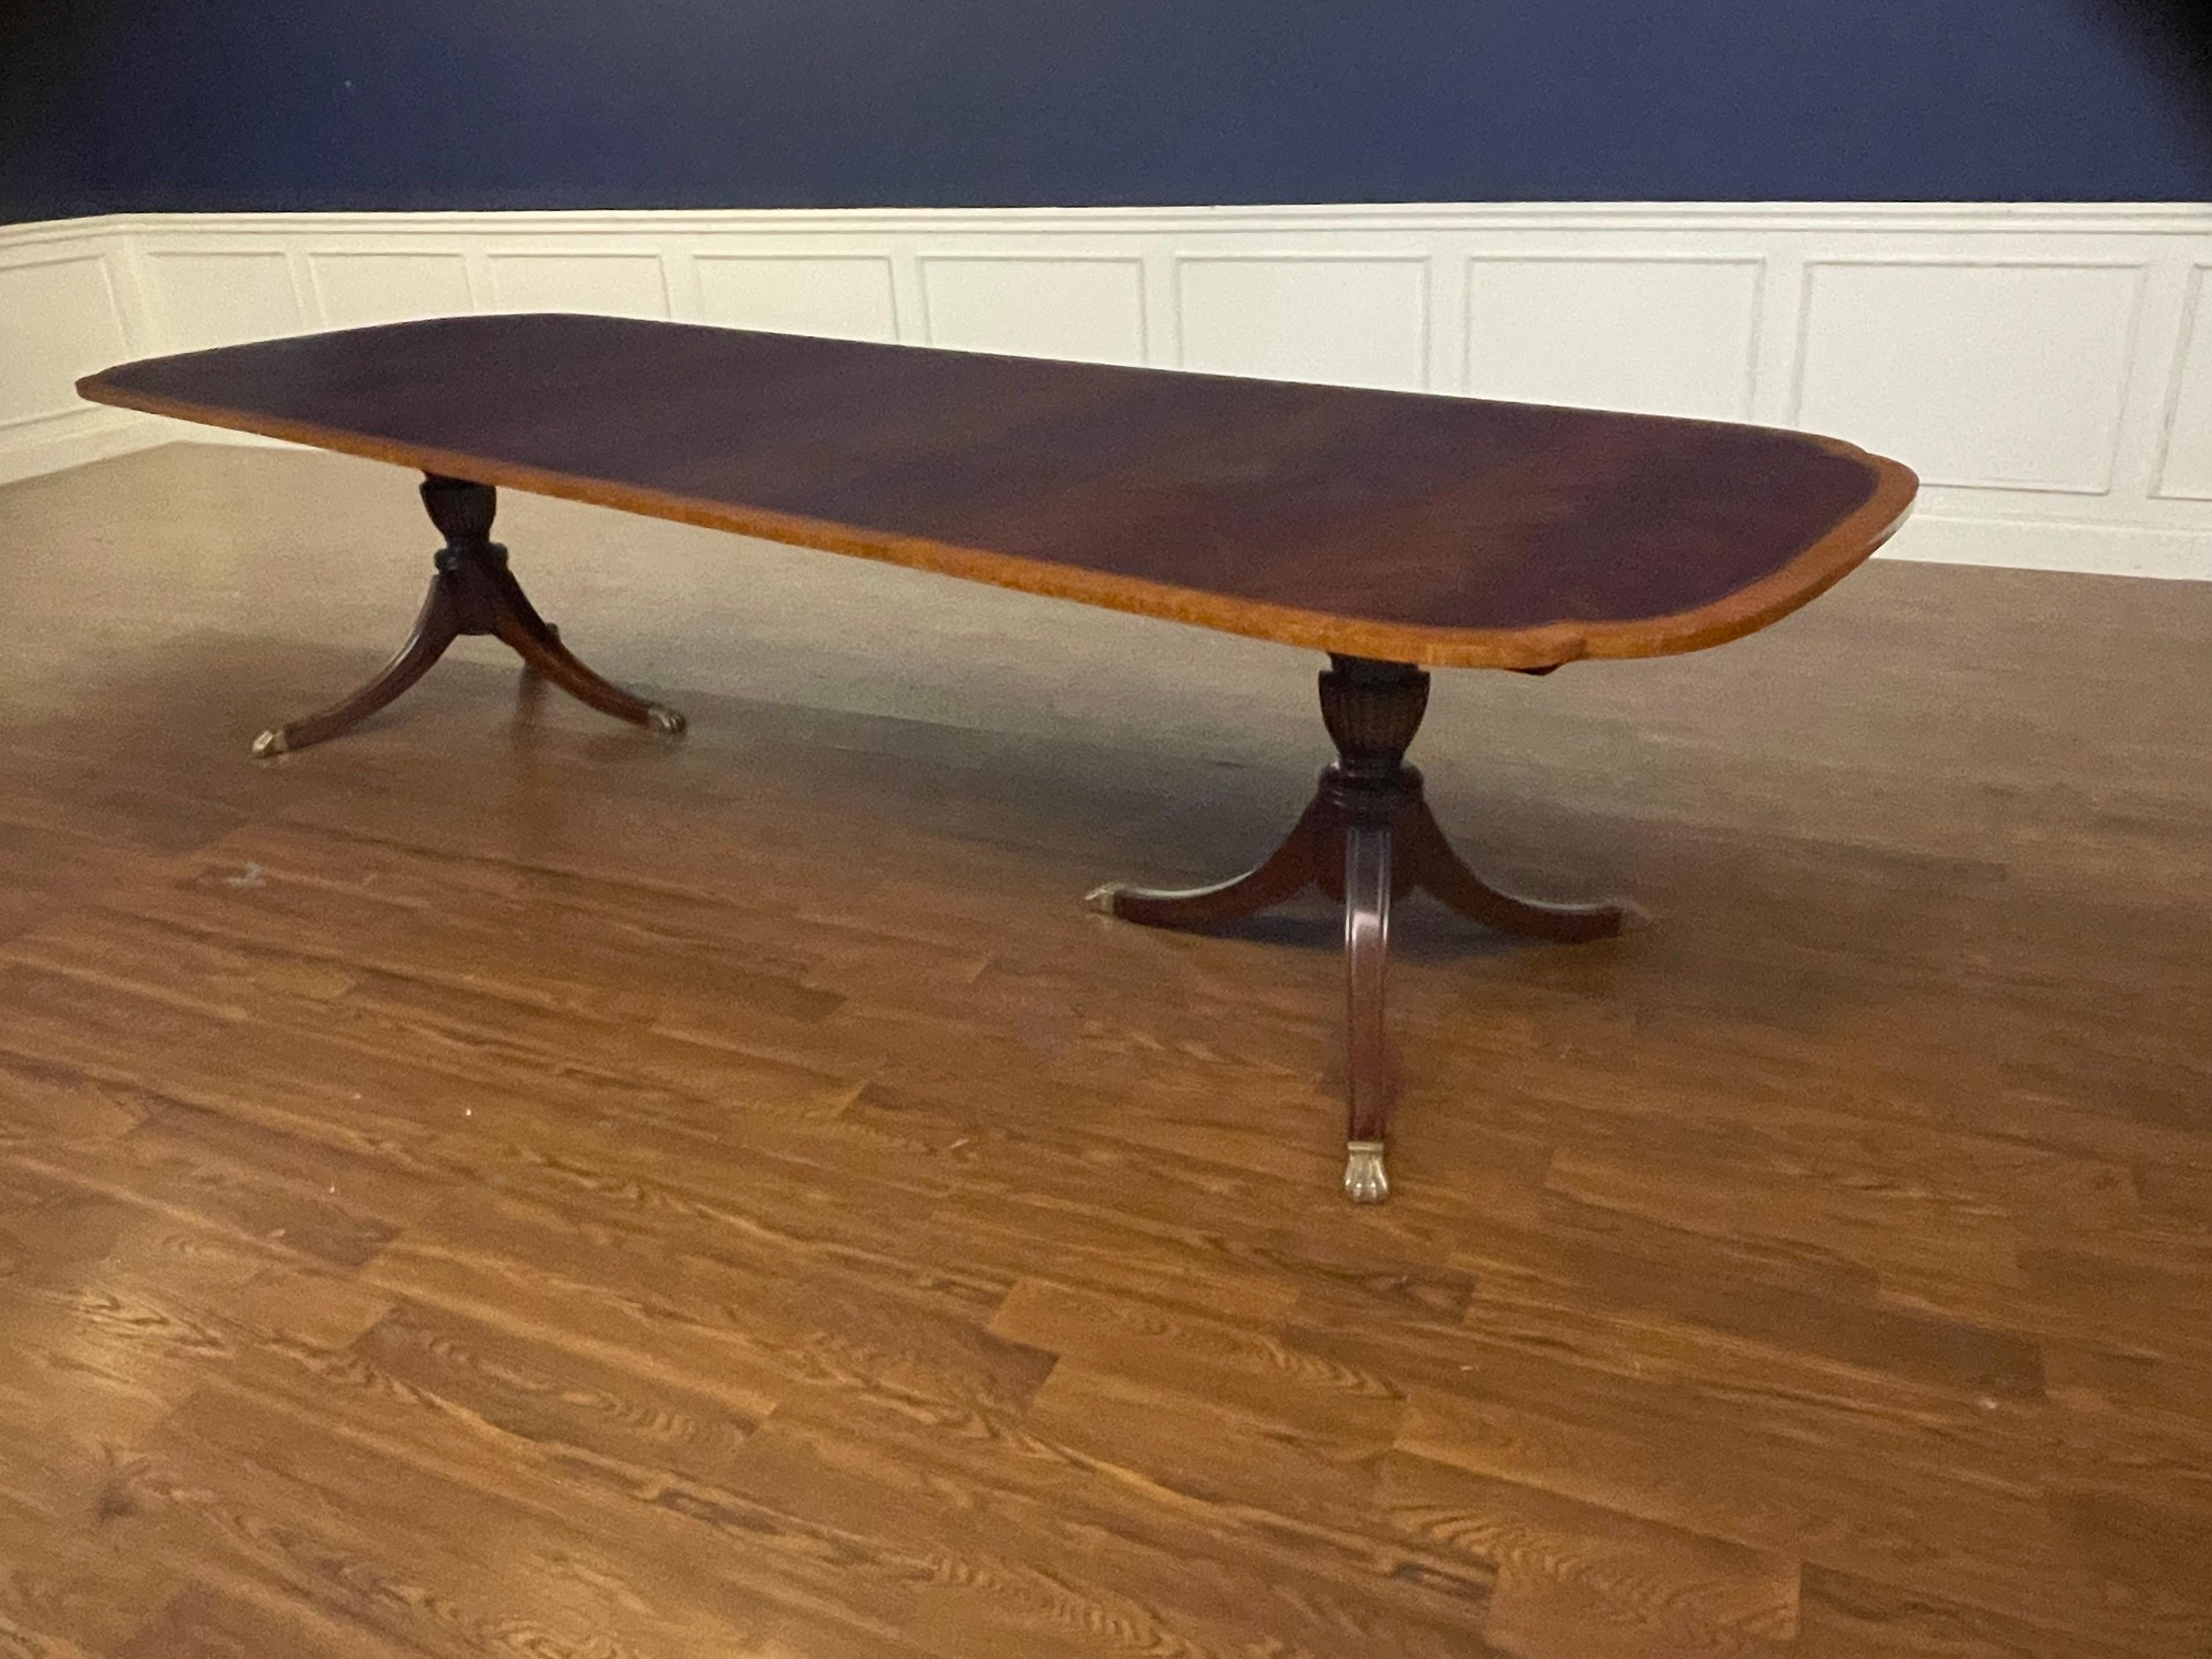 Mahogany Scallop Cornered Dining Table by Leighton Hall - Showroom Sample 8